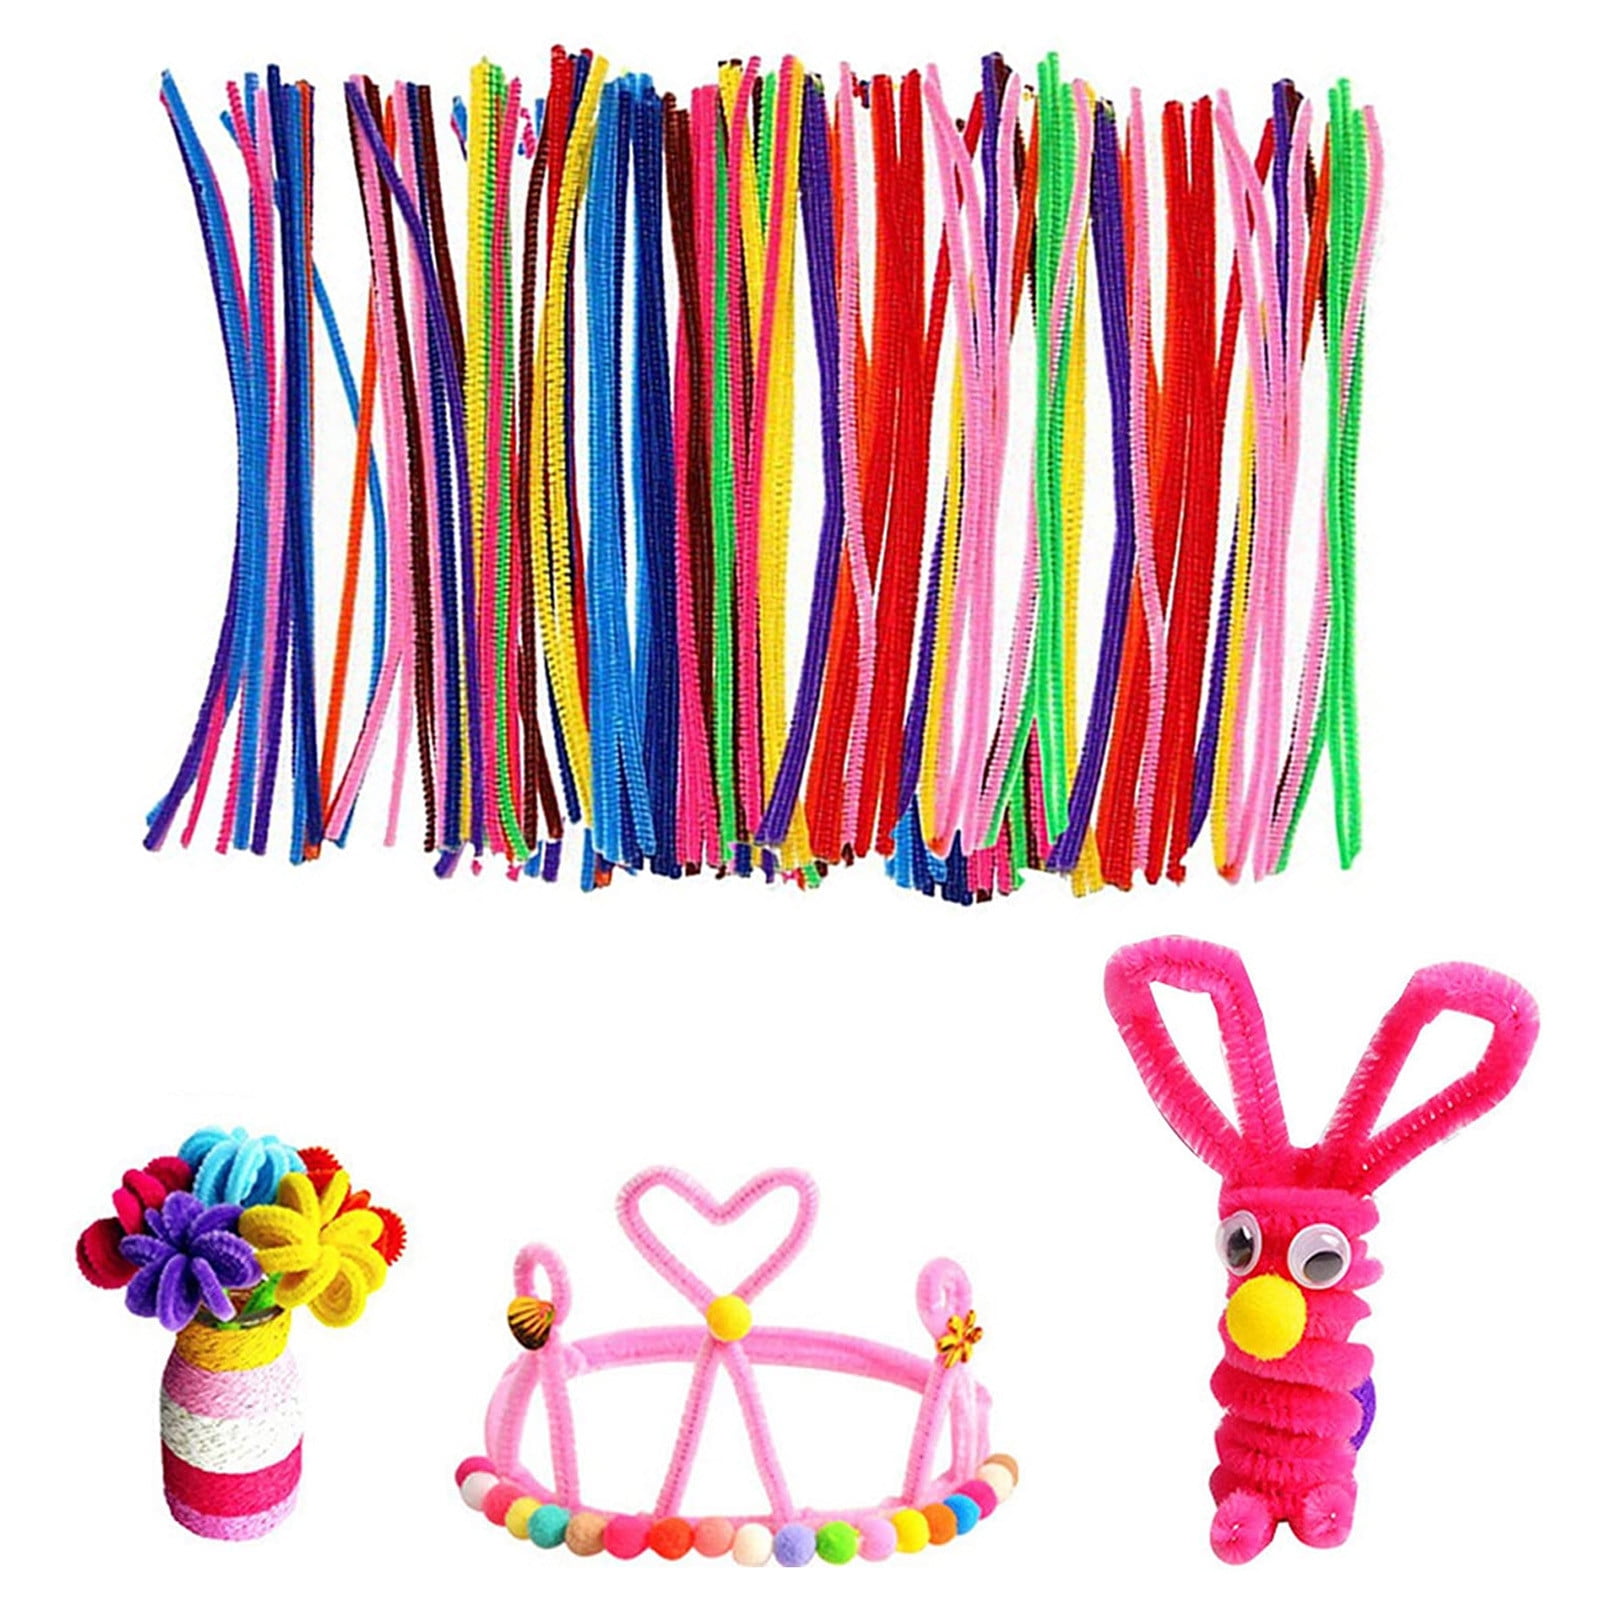 620 Pipe Cleaner Craft Images, Stock Photos, 3D objects, & Vectors